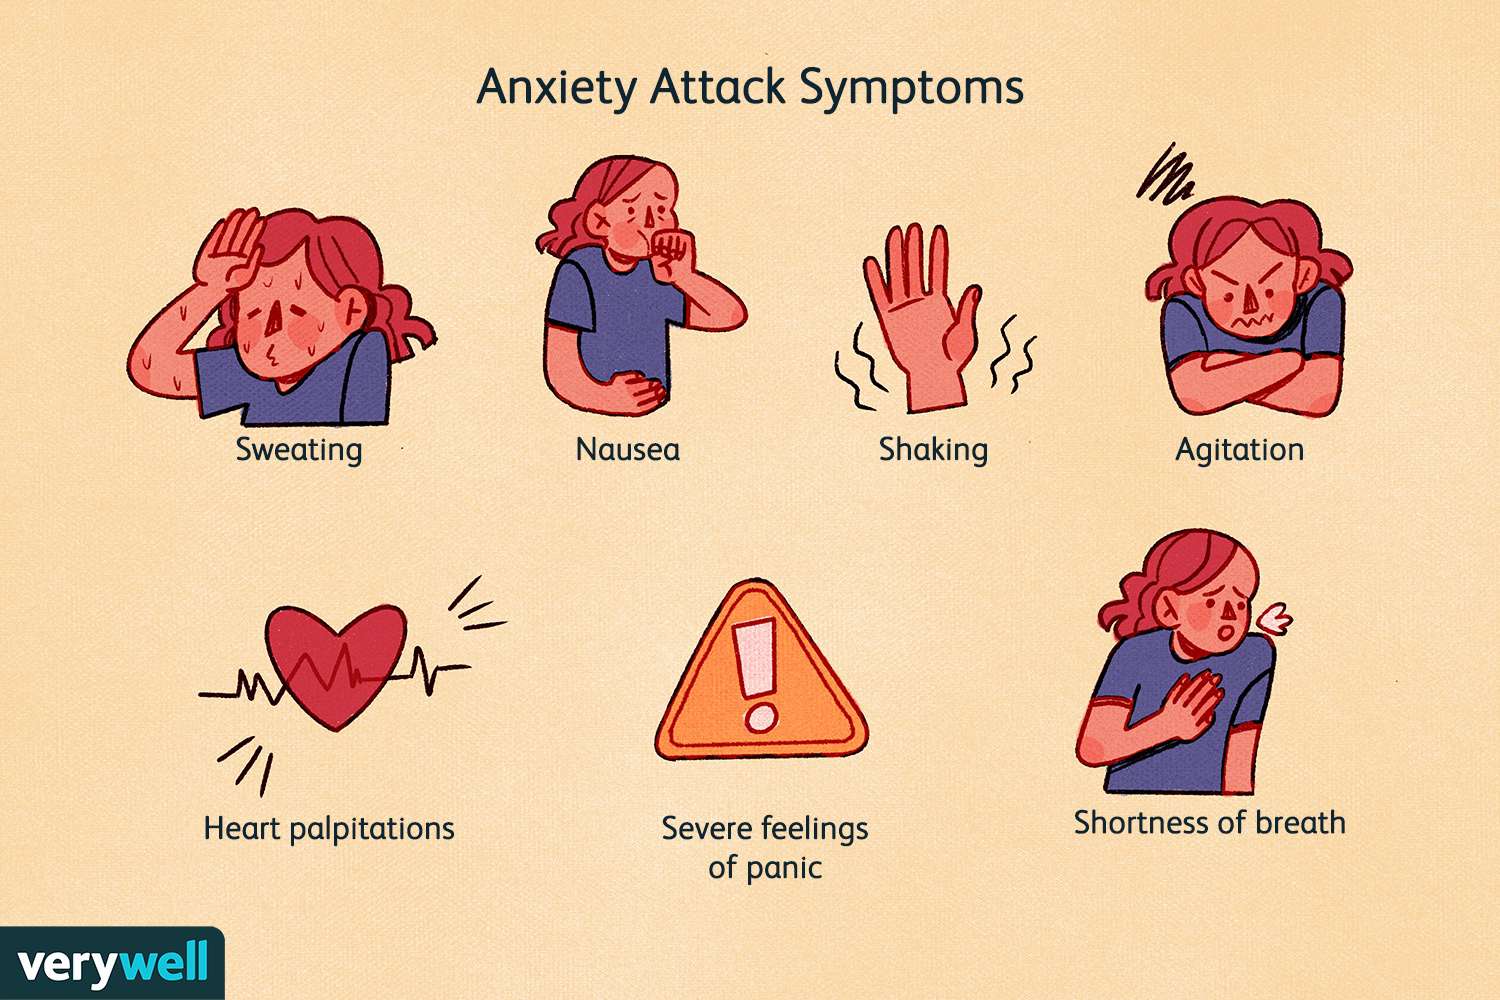 What are the warning signs of a severe anxiety attack?